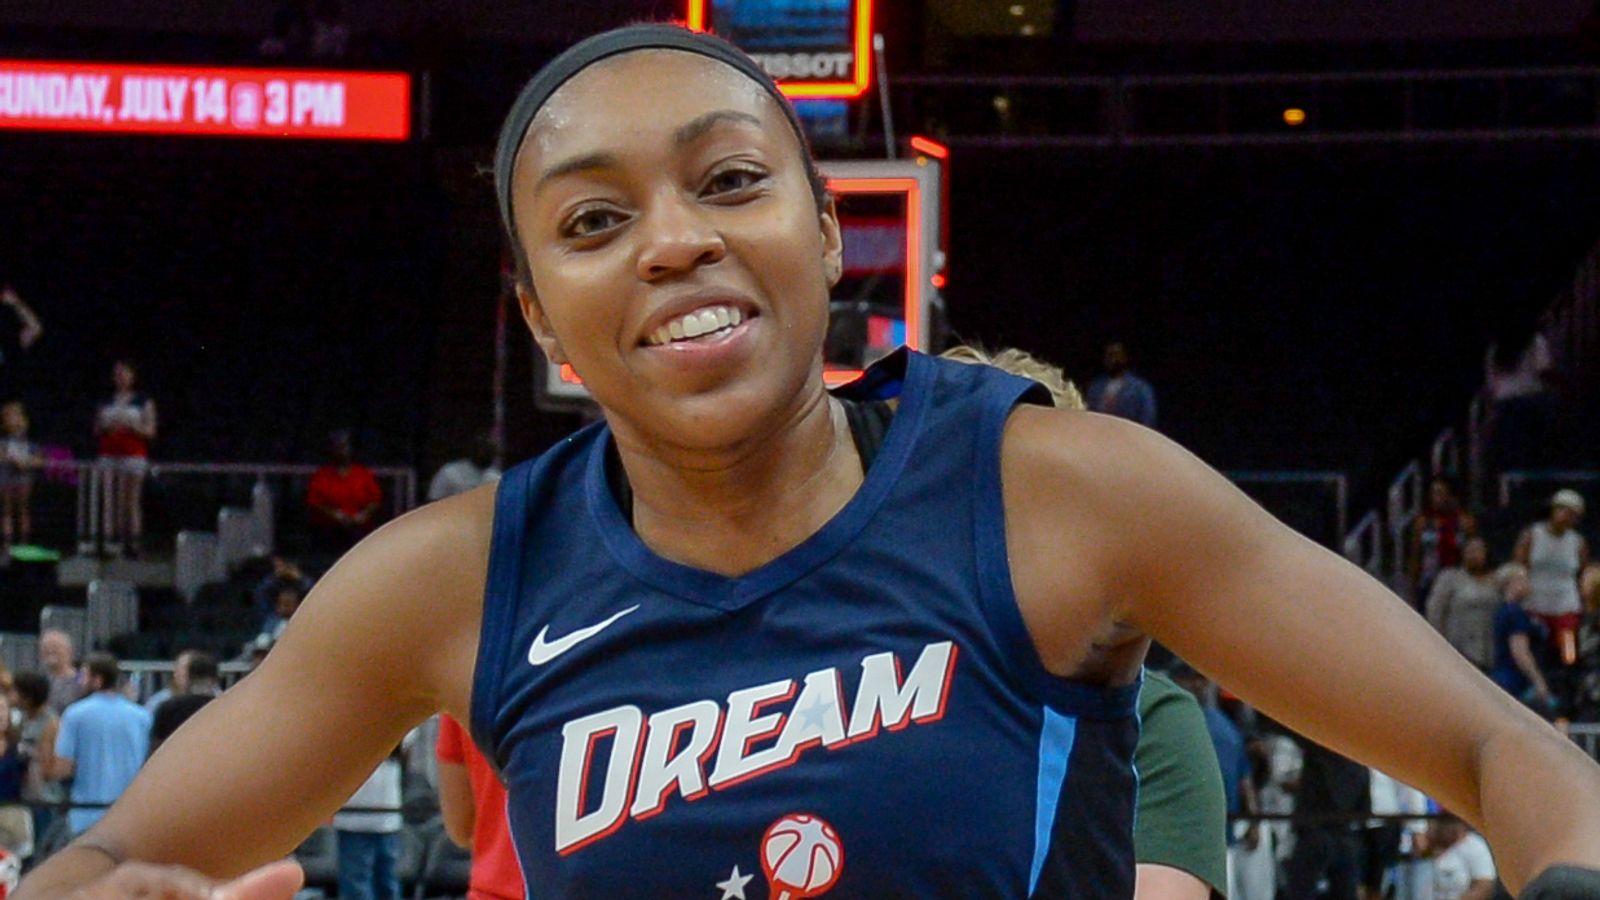 WNBA News: What's going on with the Atlanta Dream?